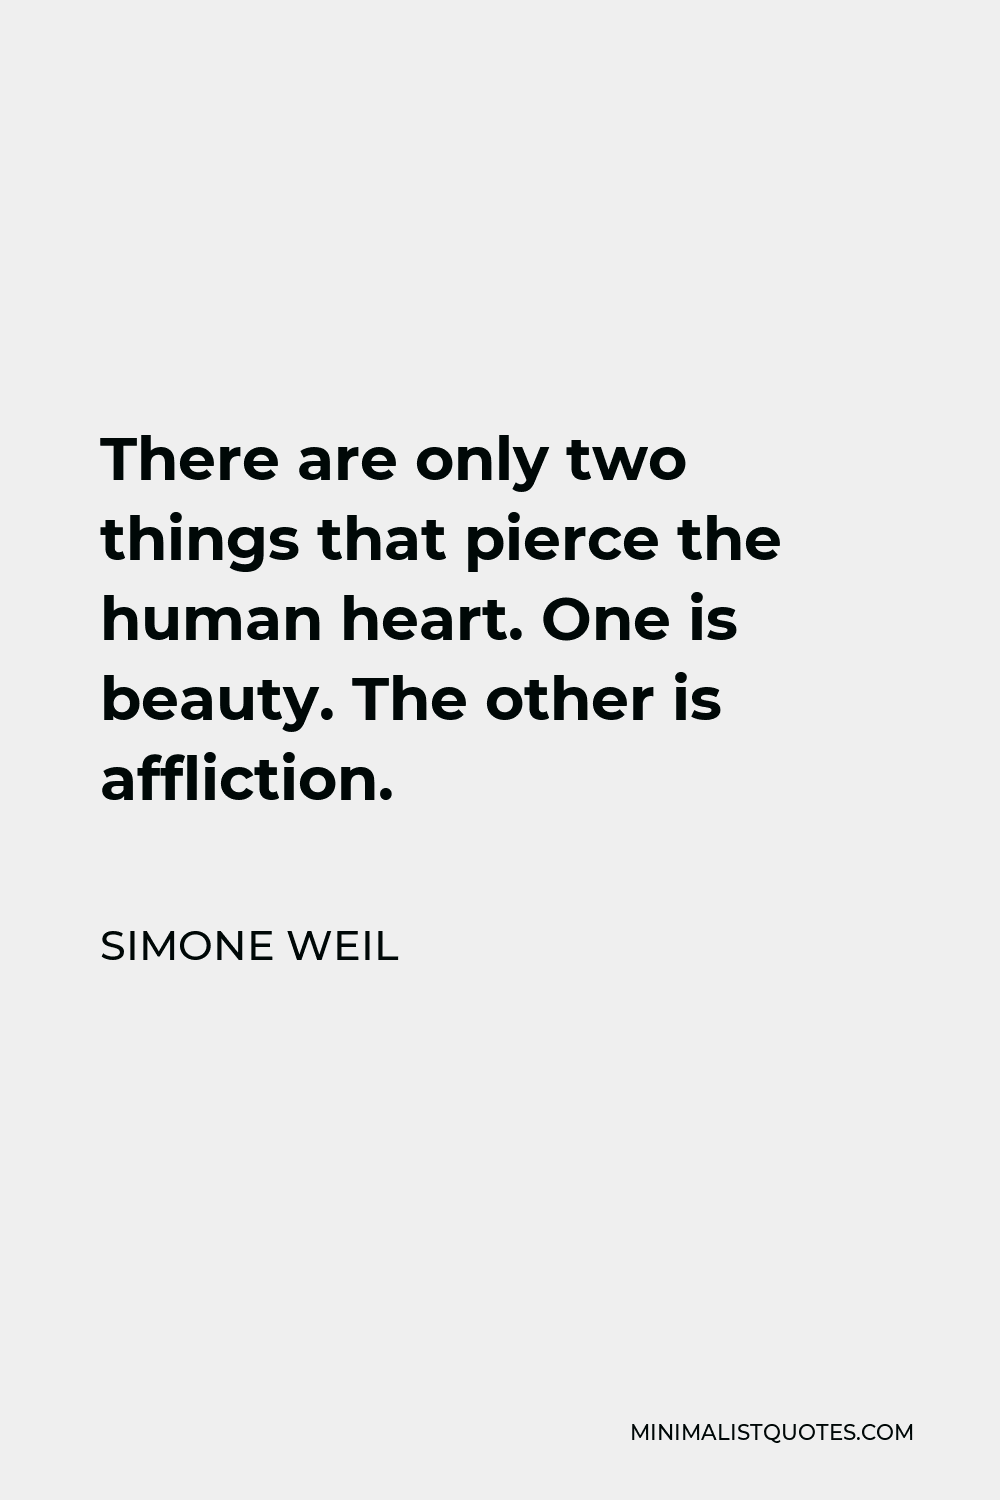 Simone Weil Quote - There are only two things that pierce the human heart. One is beauty. The other is affliction.